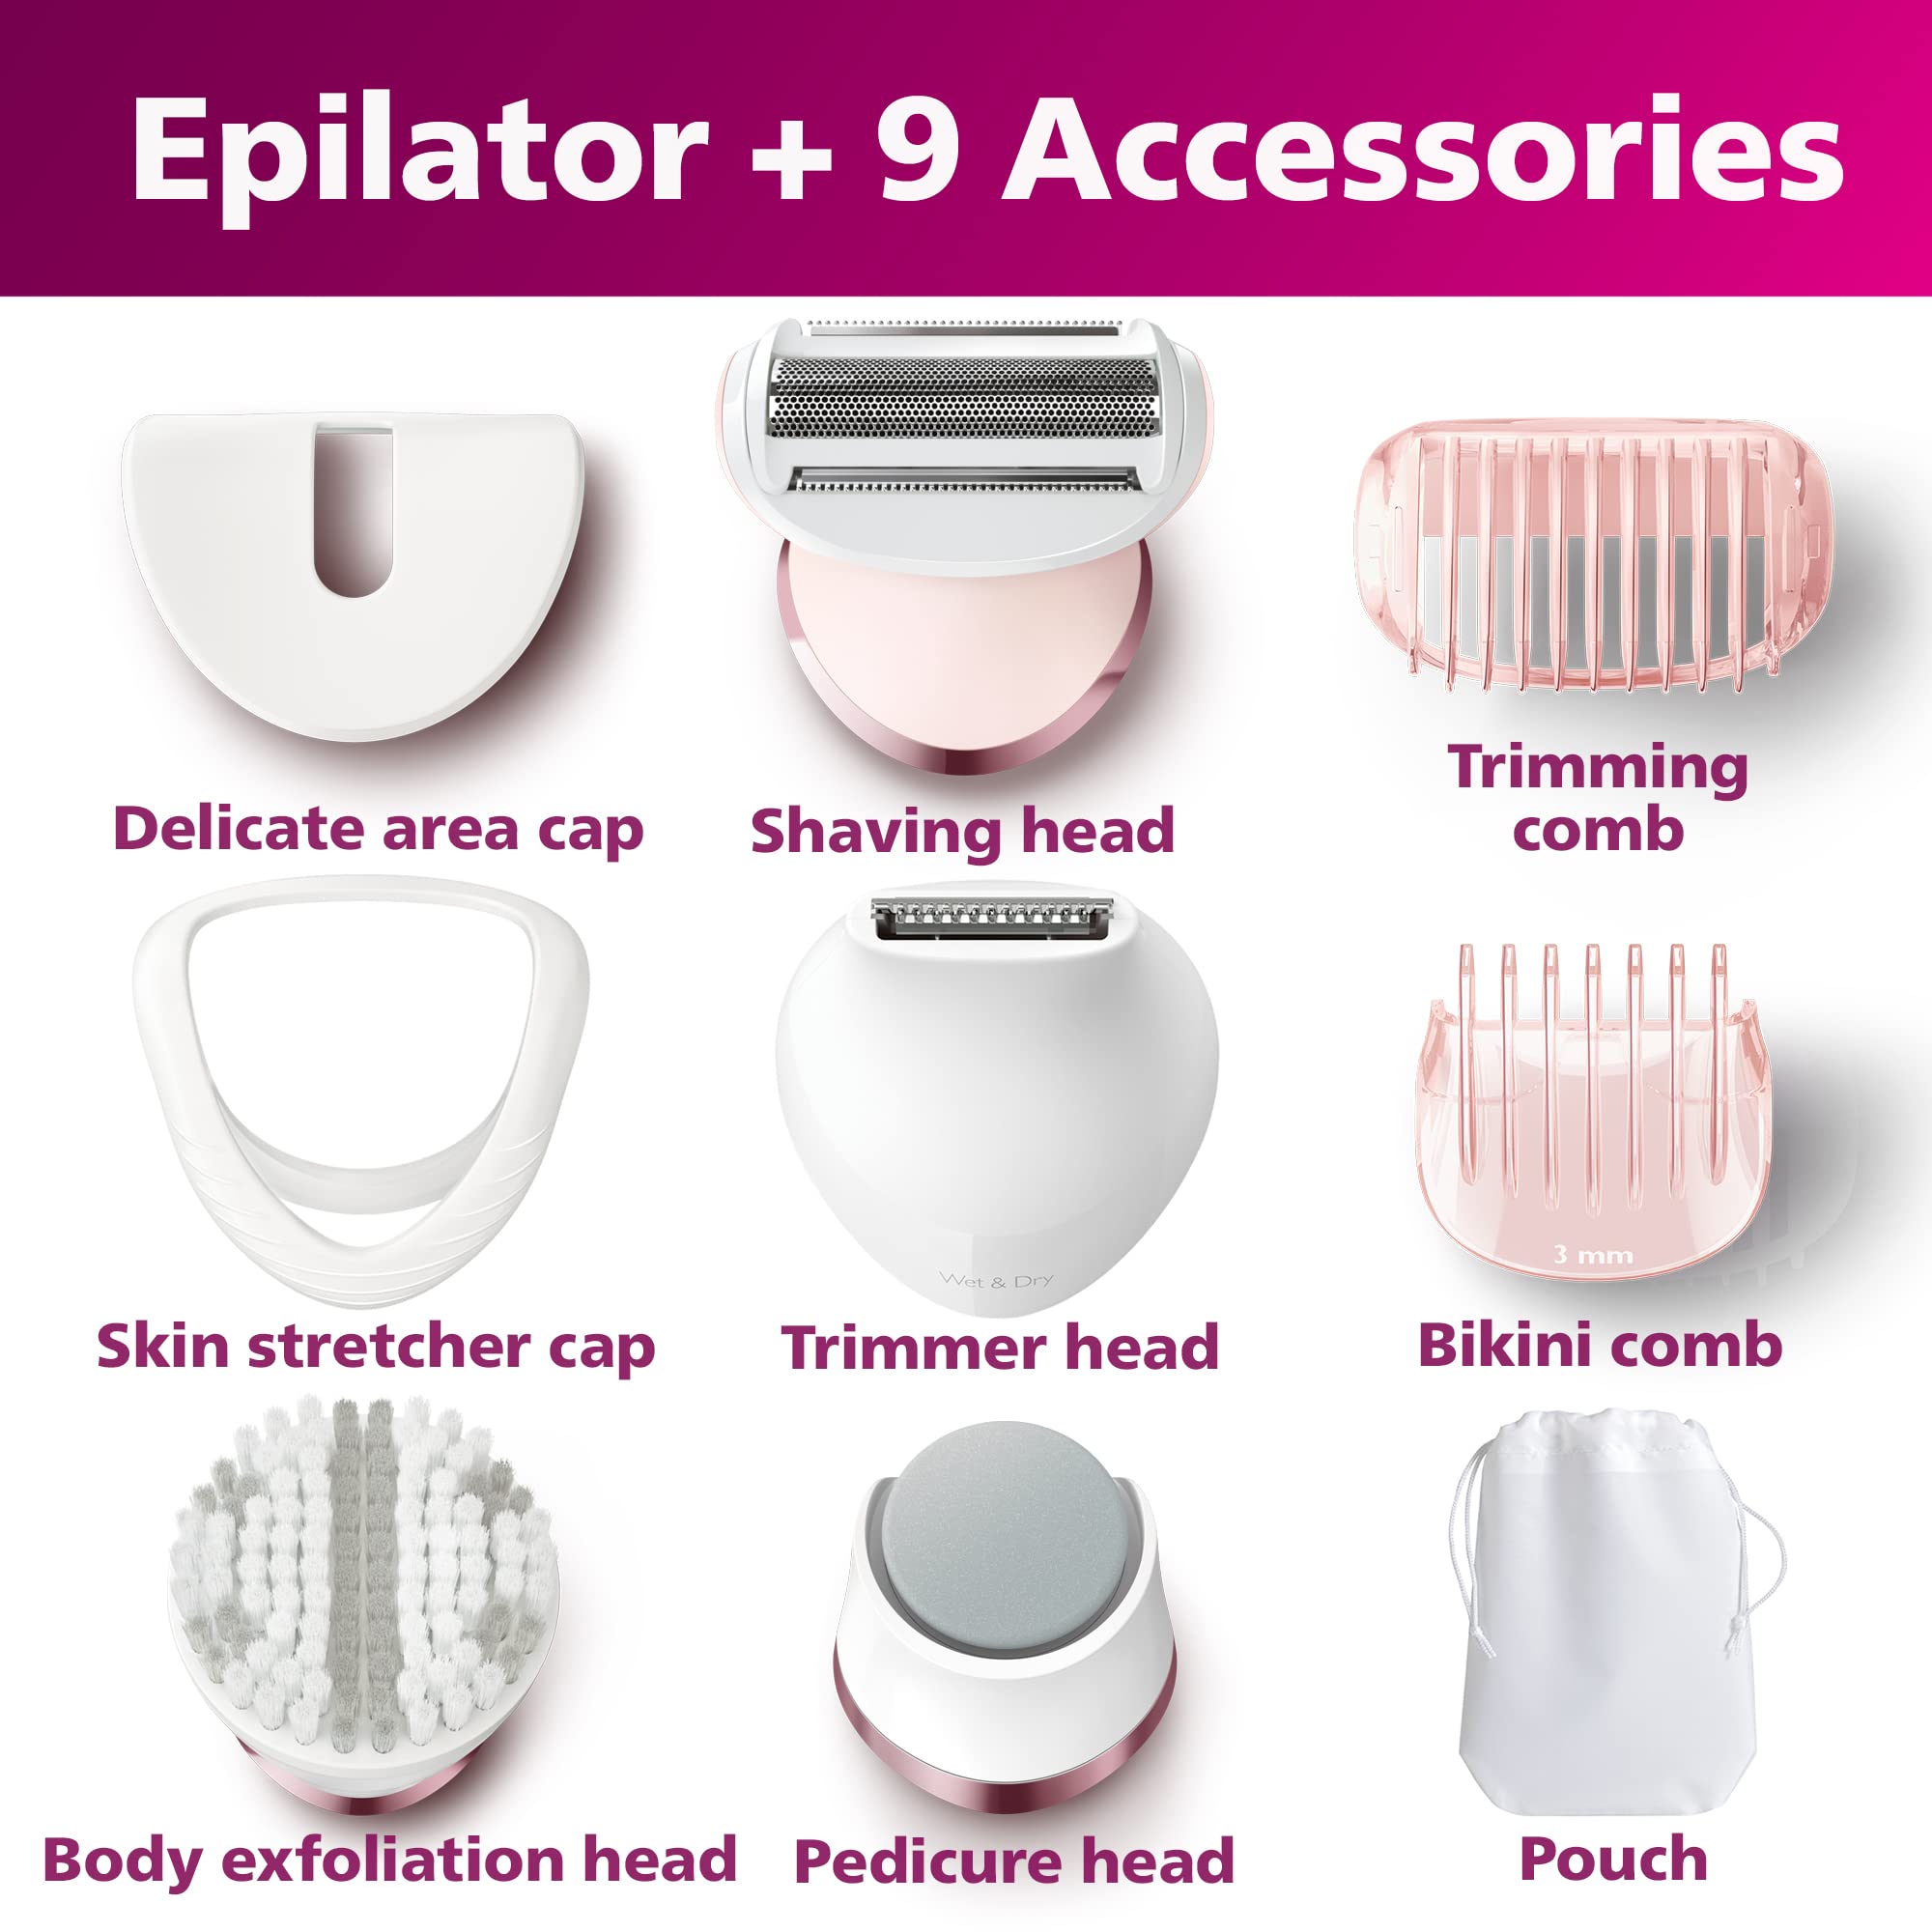 Philips Epilator Series 8000 5 in 1 Shaver for Women, Trimmer, Pedicure and Body Exfoliator with 9 Accessories, BRE740/14